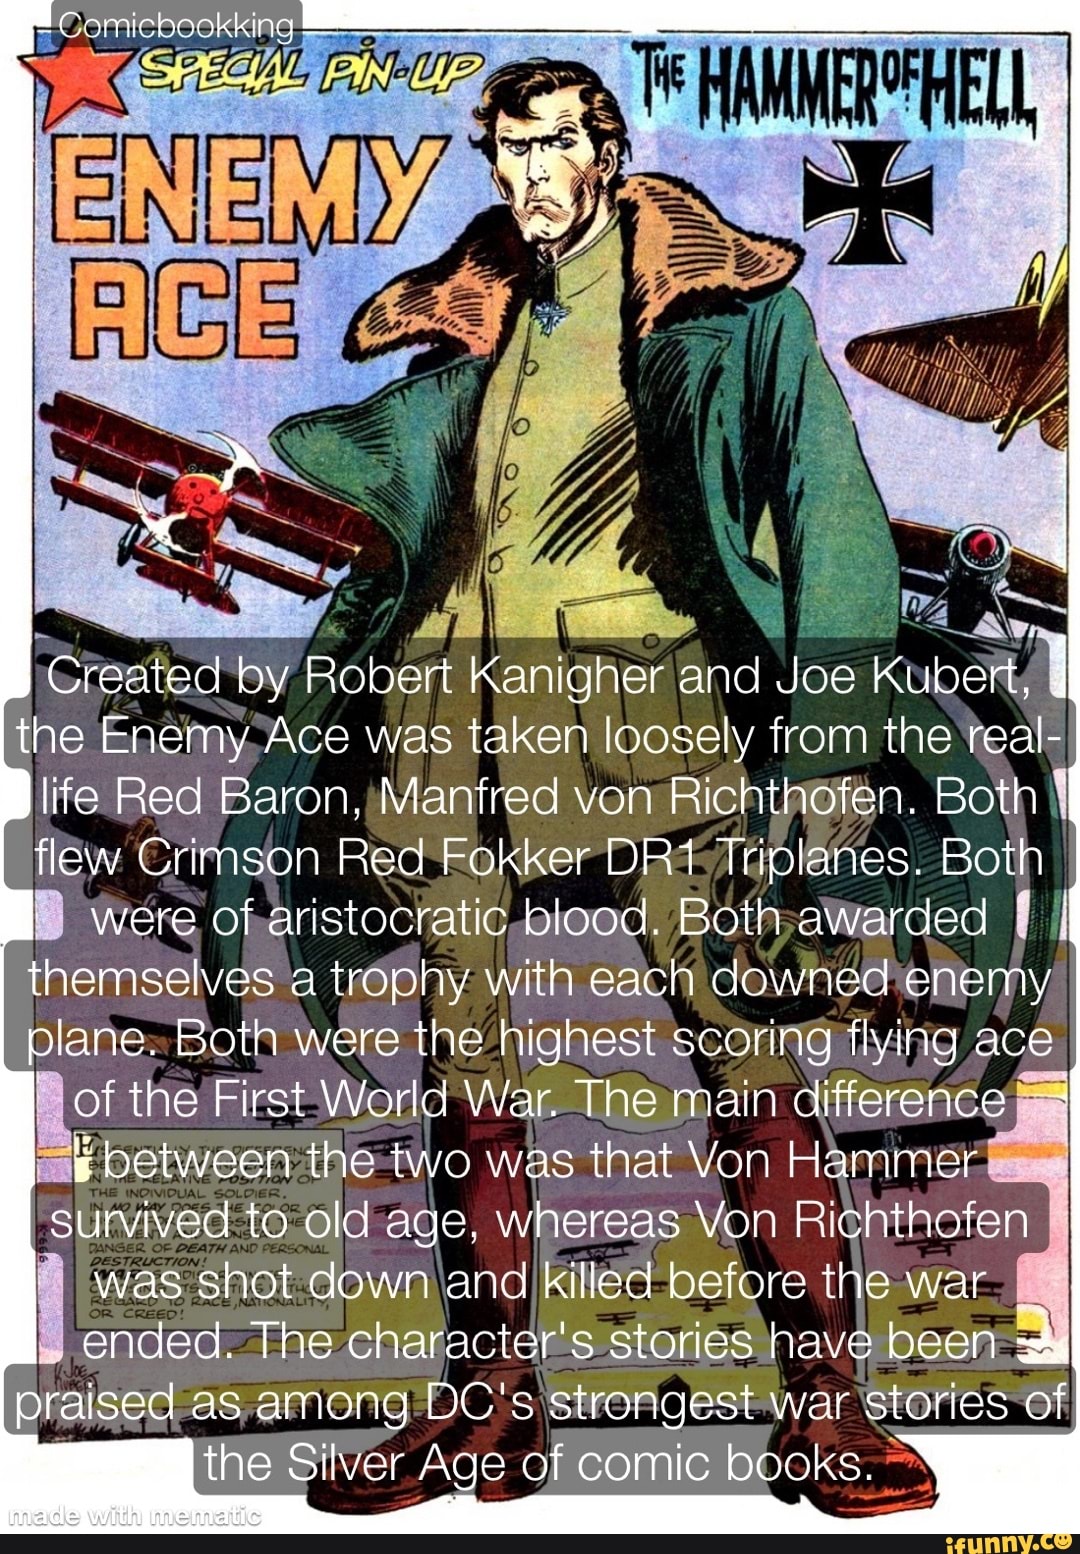 Created by Robert Kanigher and Joe Kubert, Enemy was taken loosely the real-